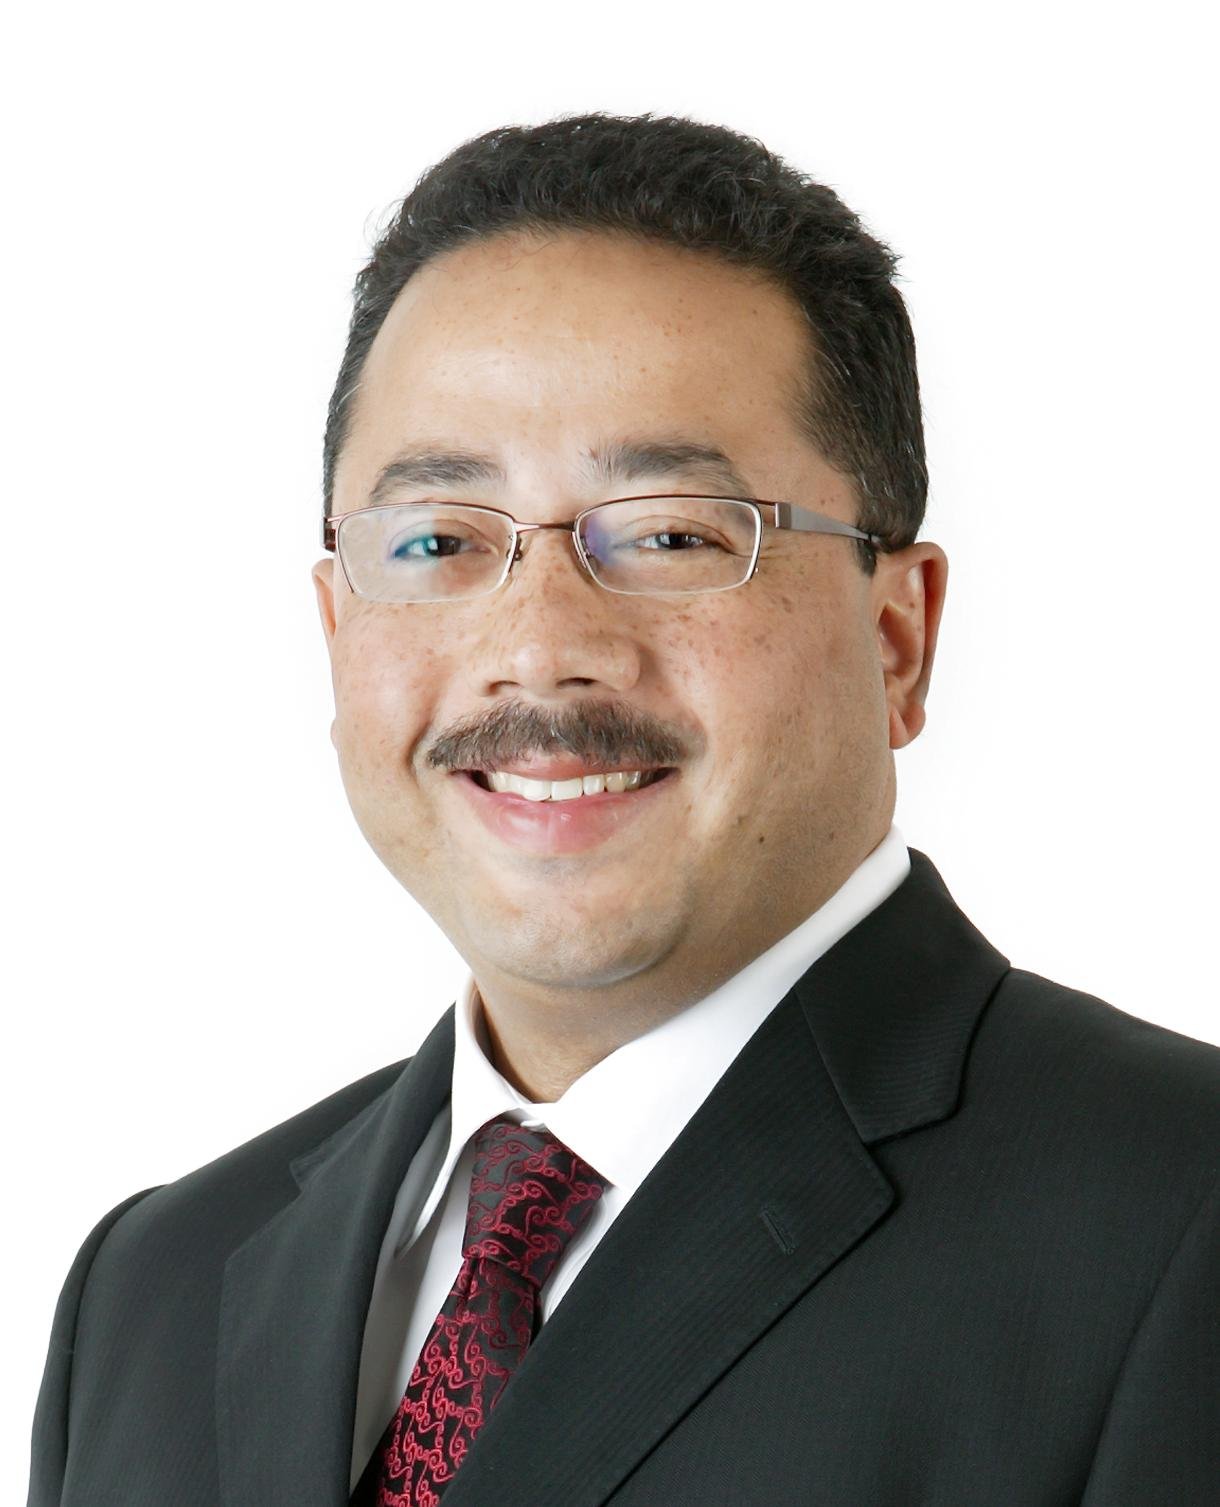 Mr Abhijit Ghosh is a pharmaceutical and healthcare leader at PwC Singapore